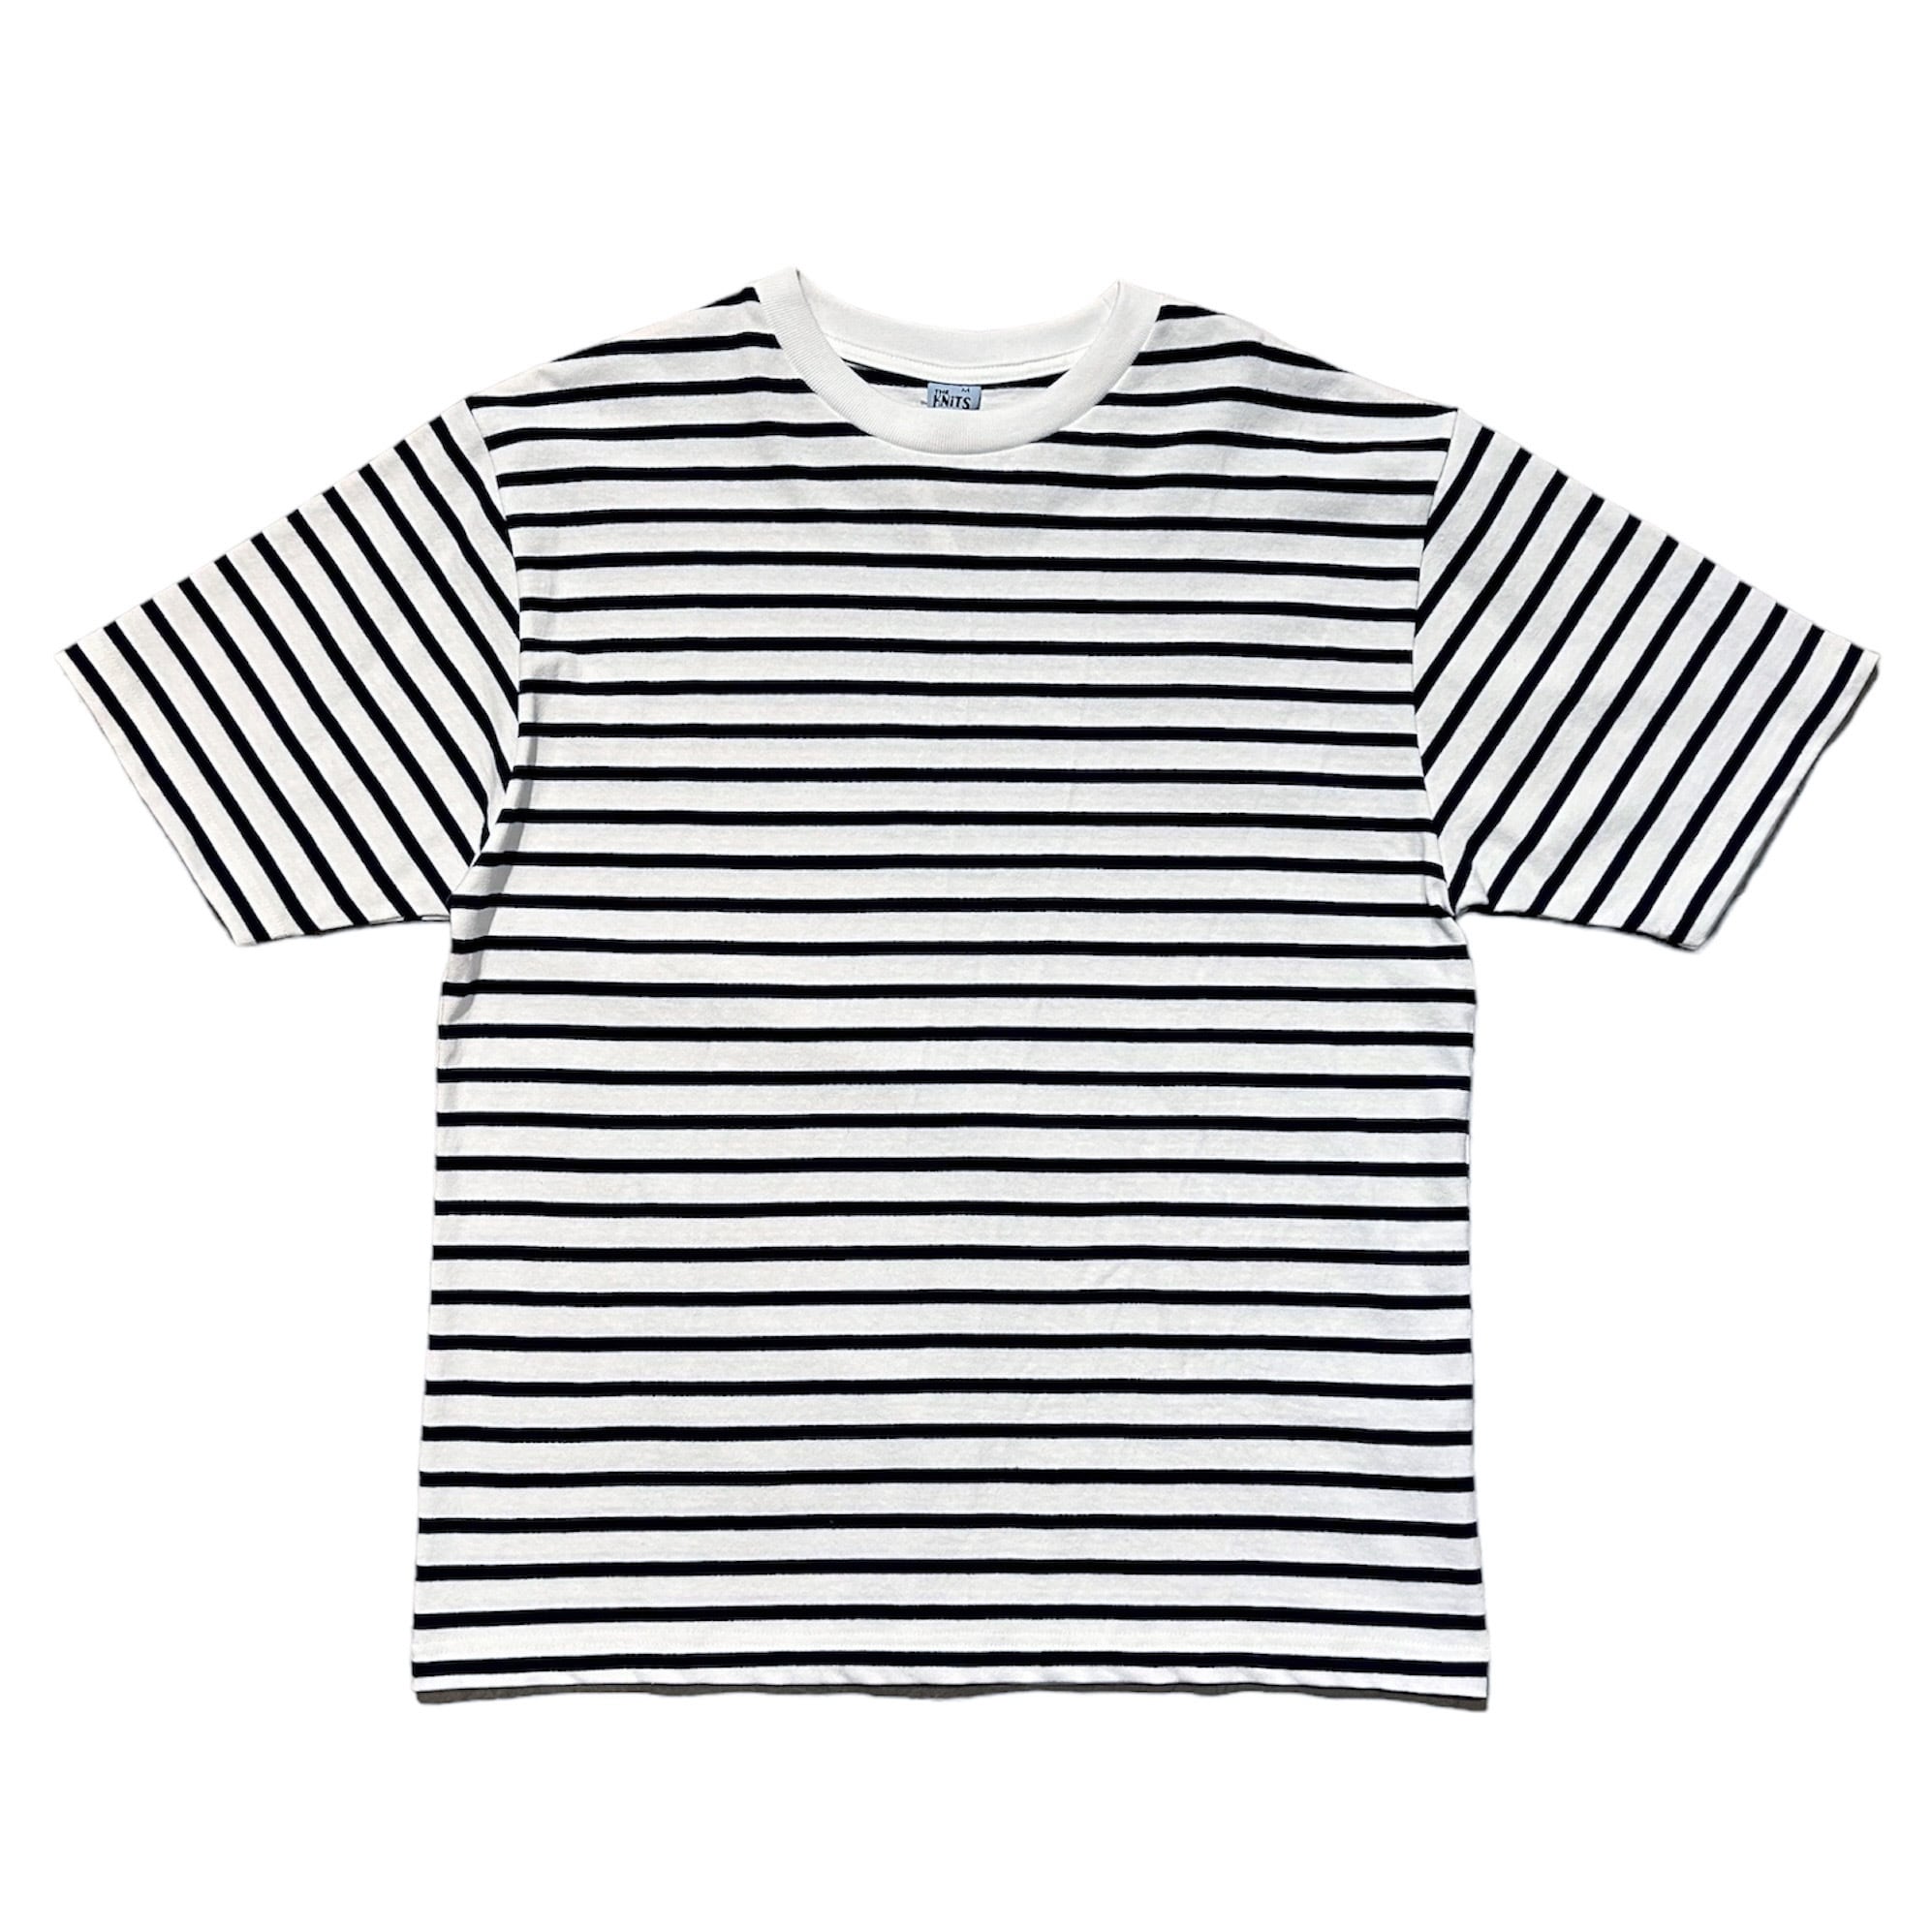 THE KNITS by SCREEN STARS Heavy Weight Border T-Shirt (スクリーン